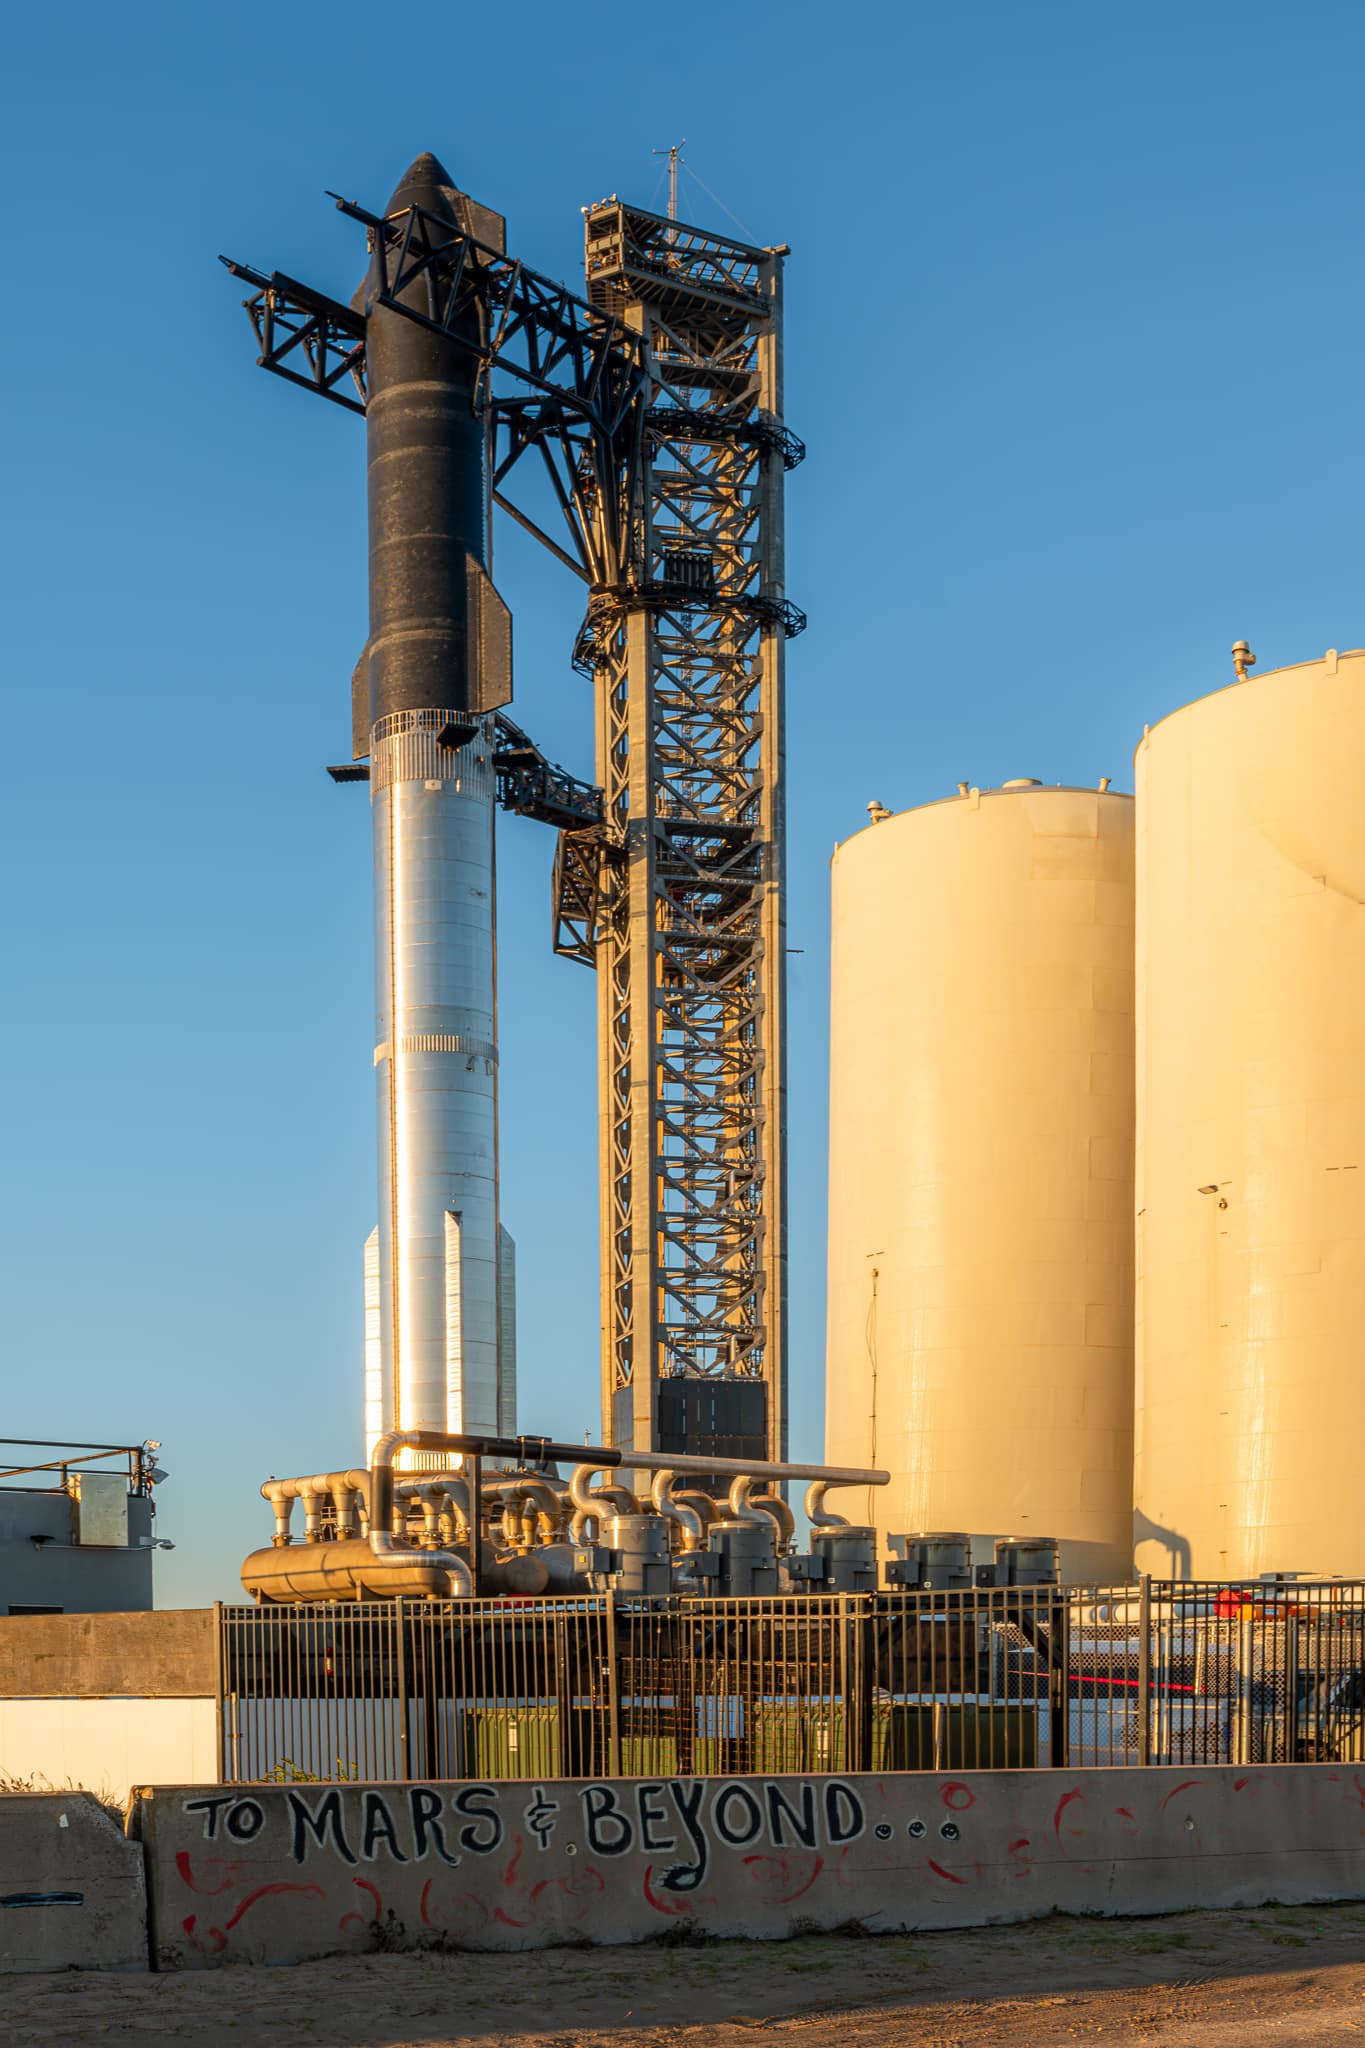 : A Starship test booster sits on the pad in Boca Chica, TX. [Credit: Richard Gallagher/FMN]